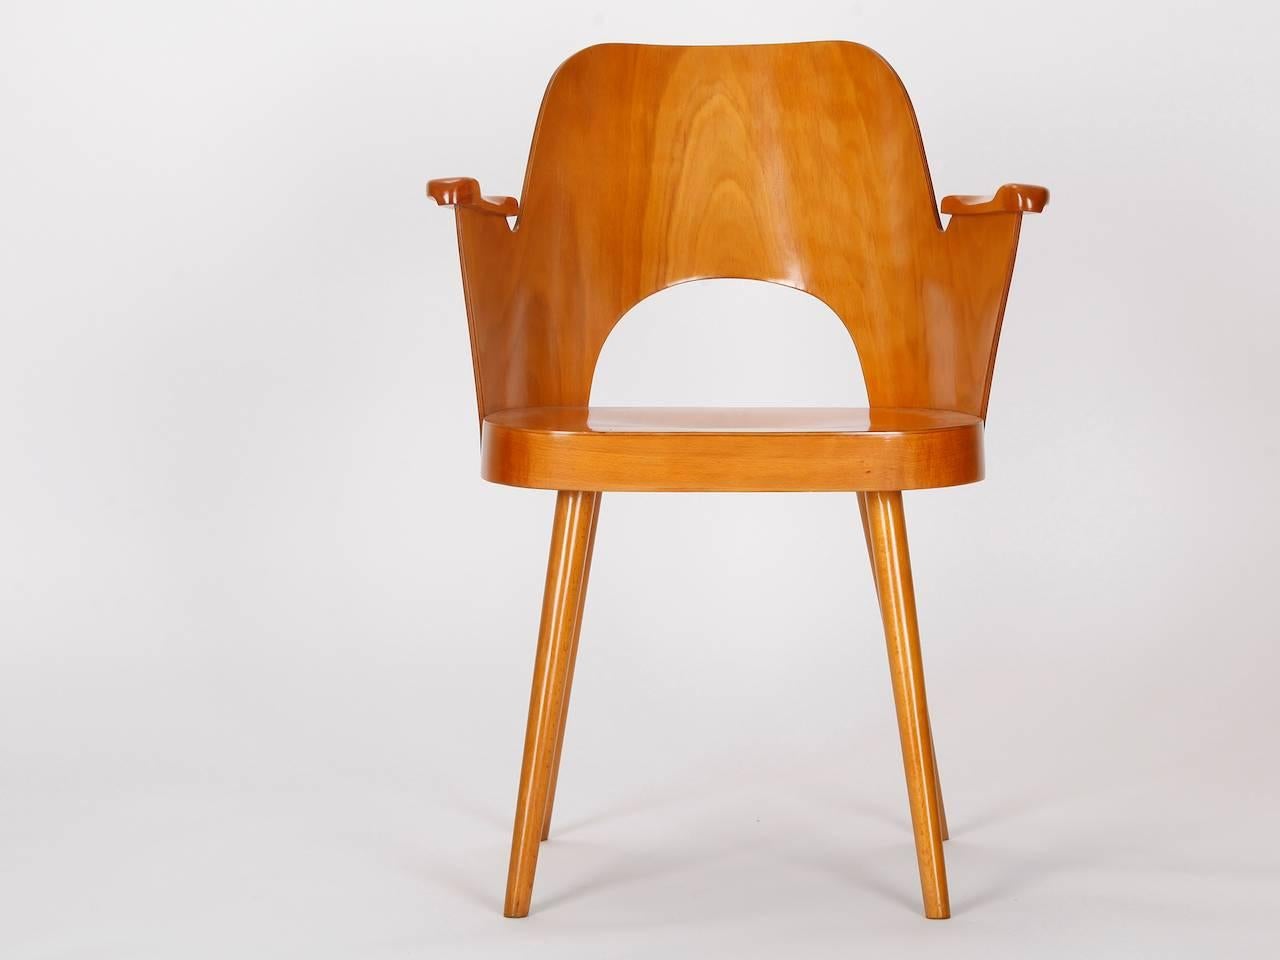 This chair was designed by Oswald Haerdtl and was manufactured in 1955 in Bystrice, part of former Czechoslovakia, by the successor of Thonet, Ton.